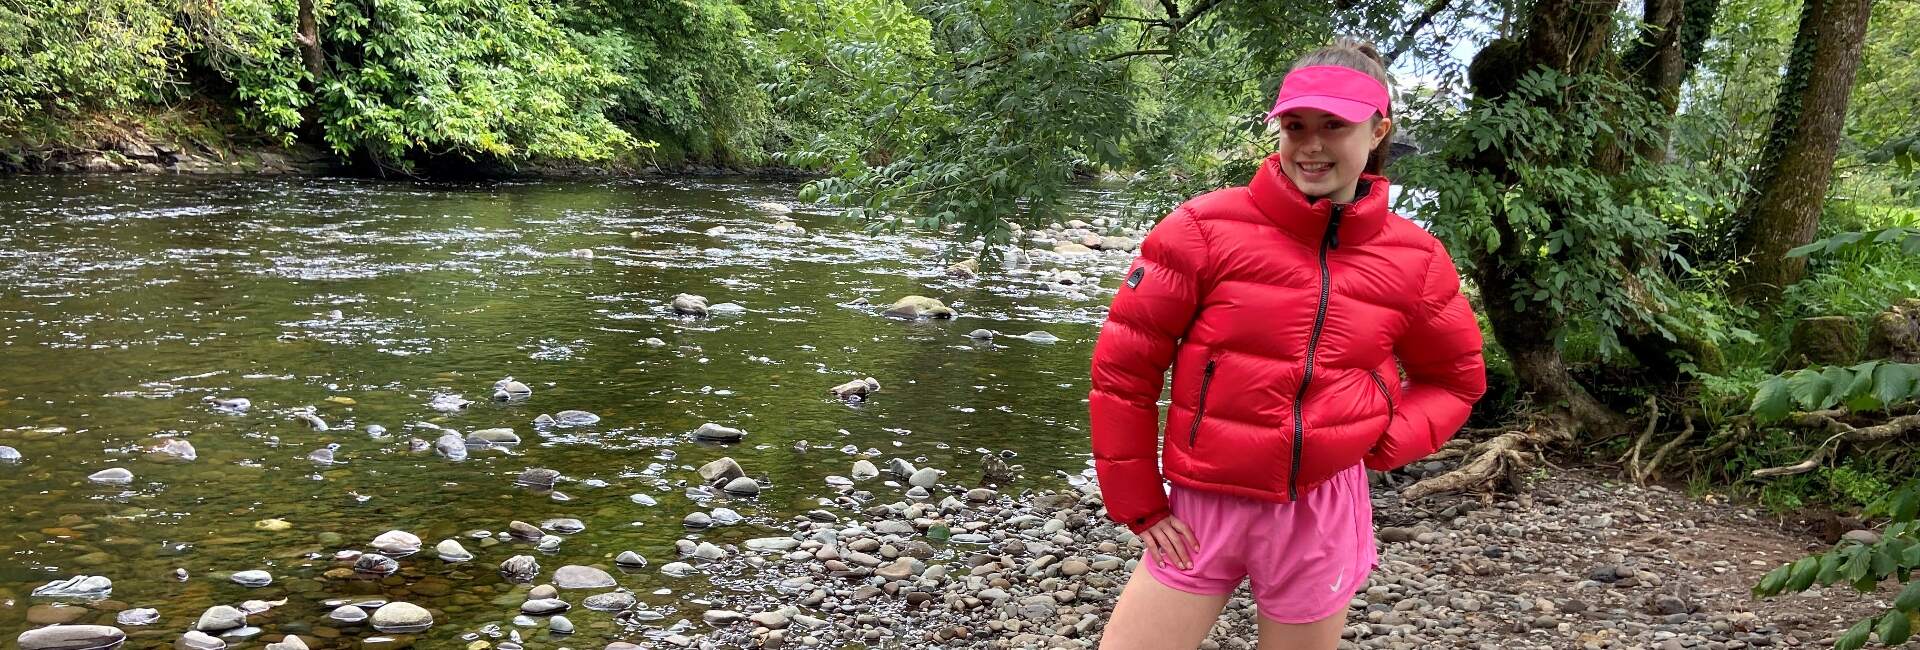 Madeline Patton enjoys a trip to Scotland after physical therapy helped with her adolescent scoliosis